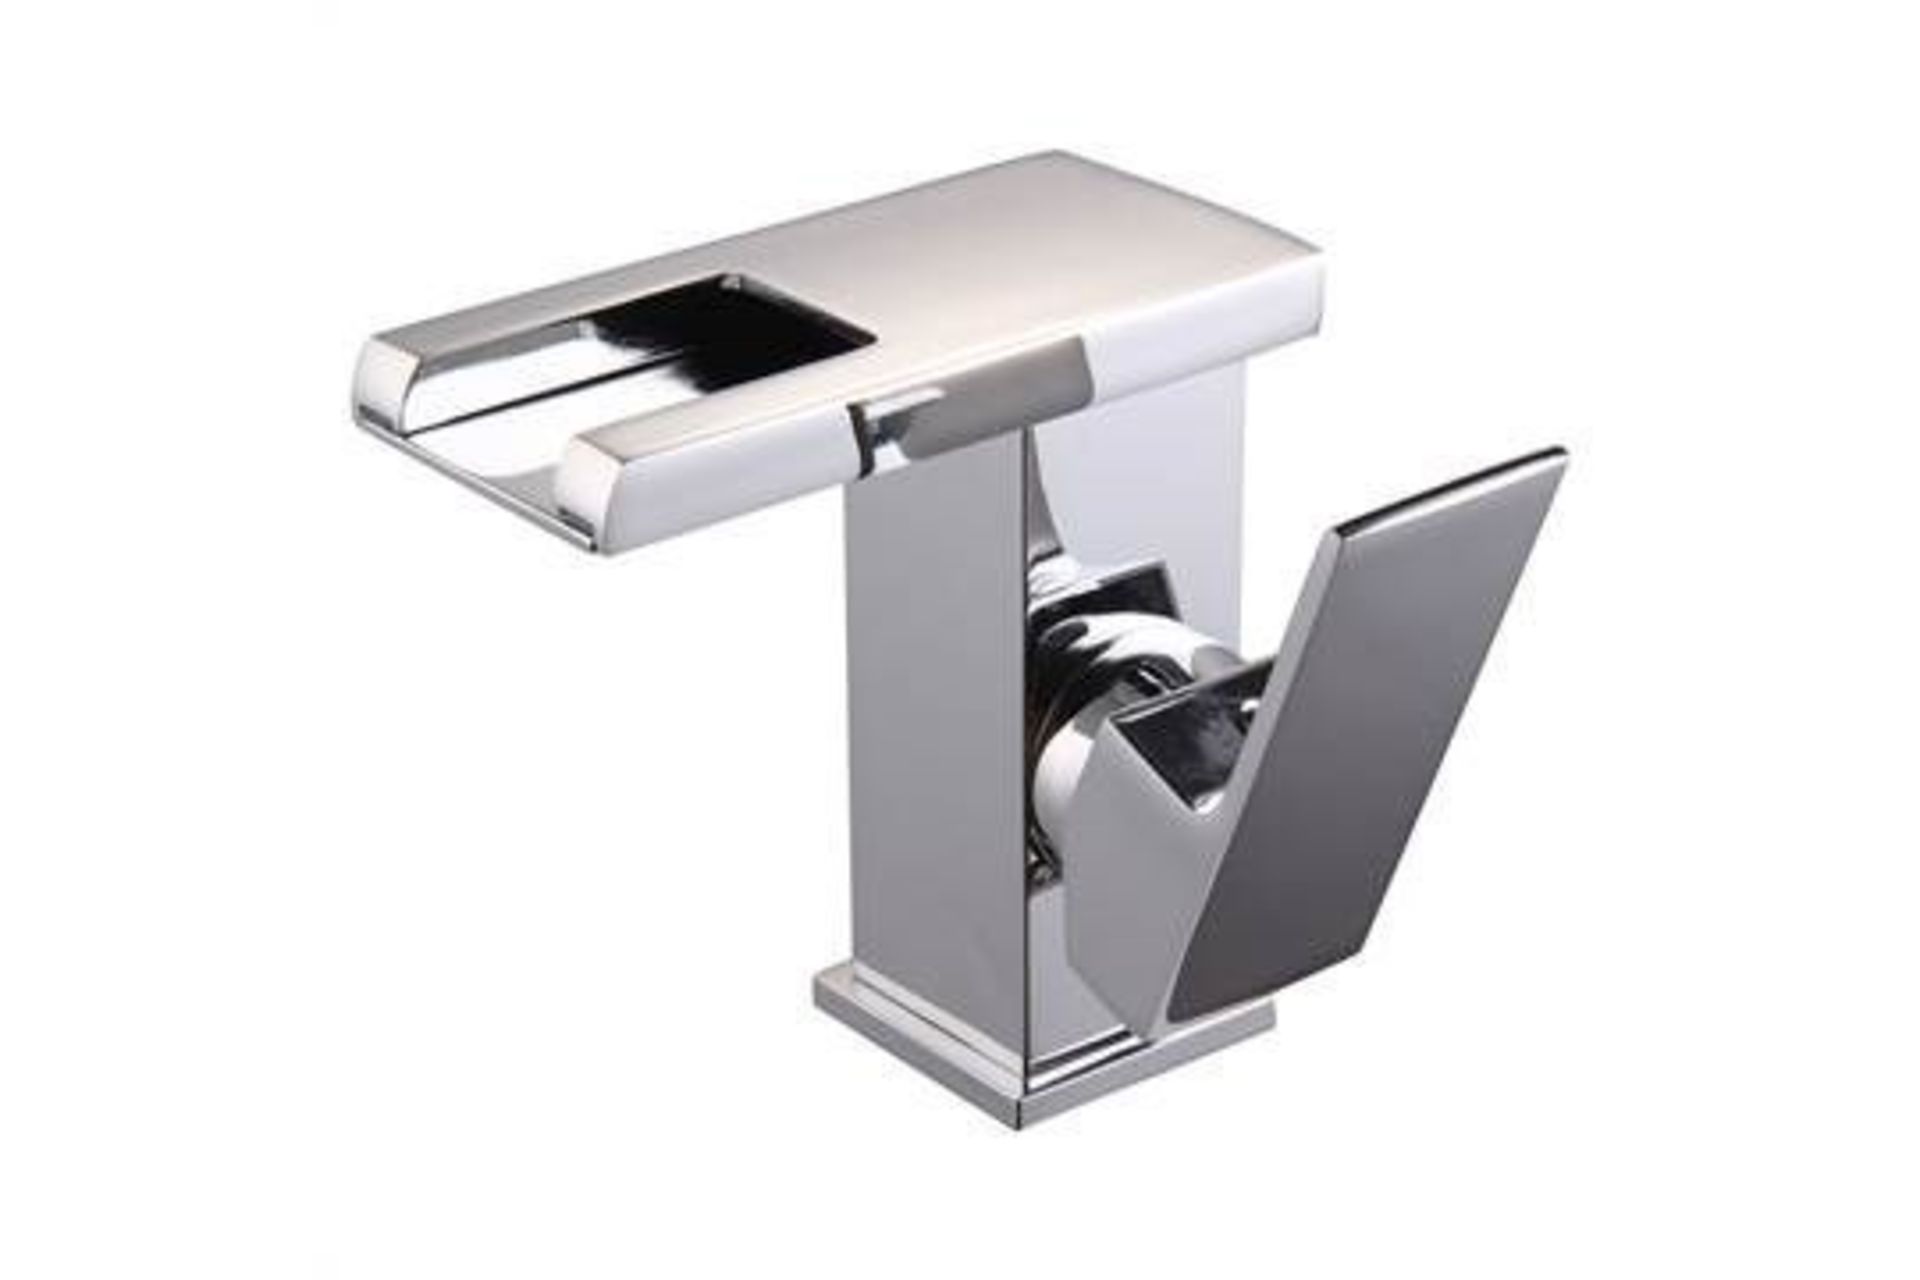 (YU1030) LED Waterfall Bathroom Basin Mixer Tap. RRP £229.99.Easy to install and clean. All ... - Image 3 of 3